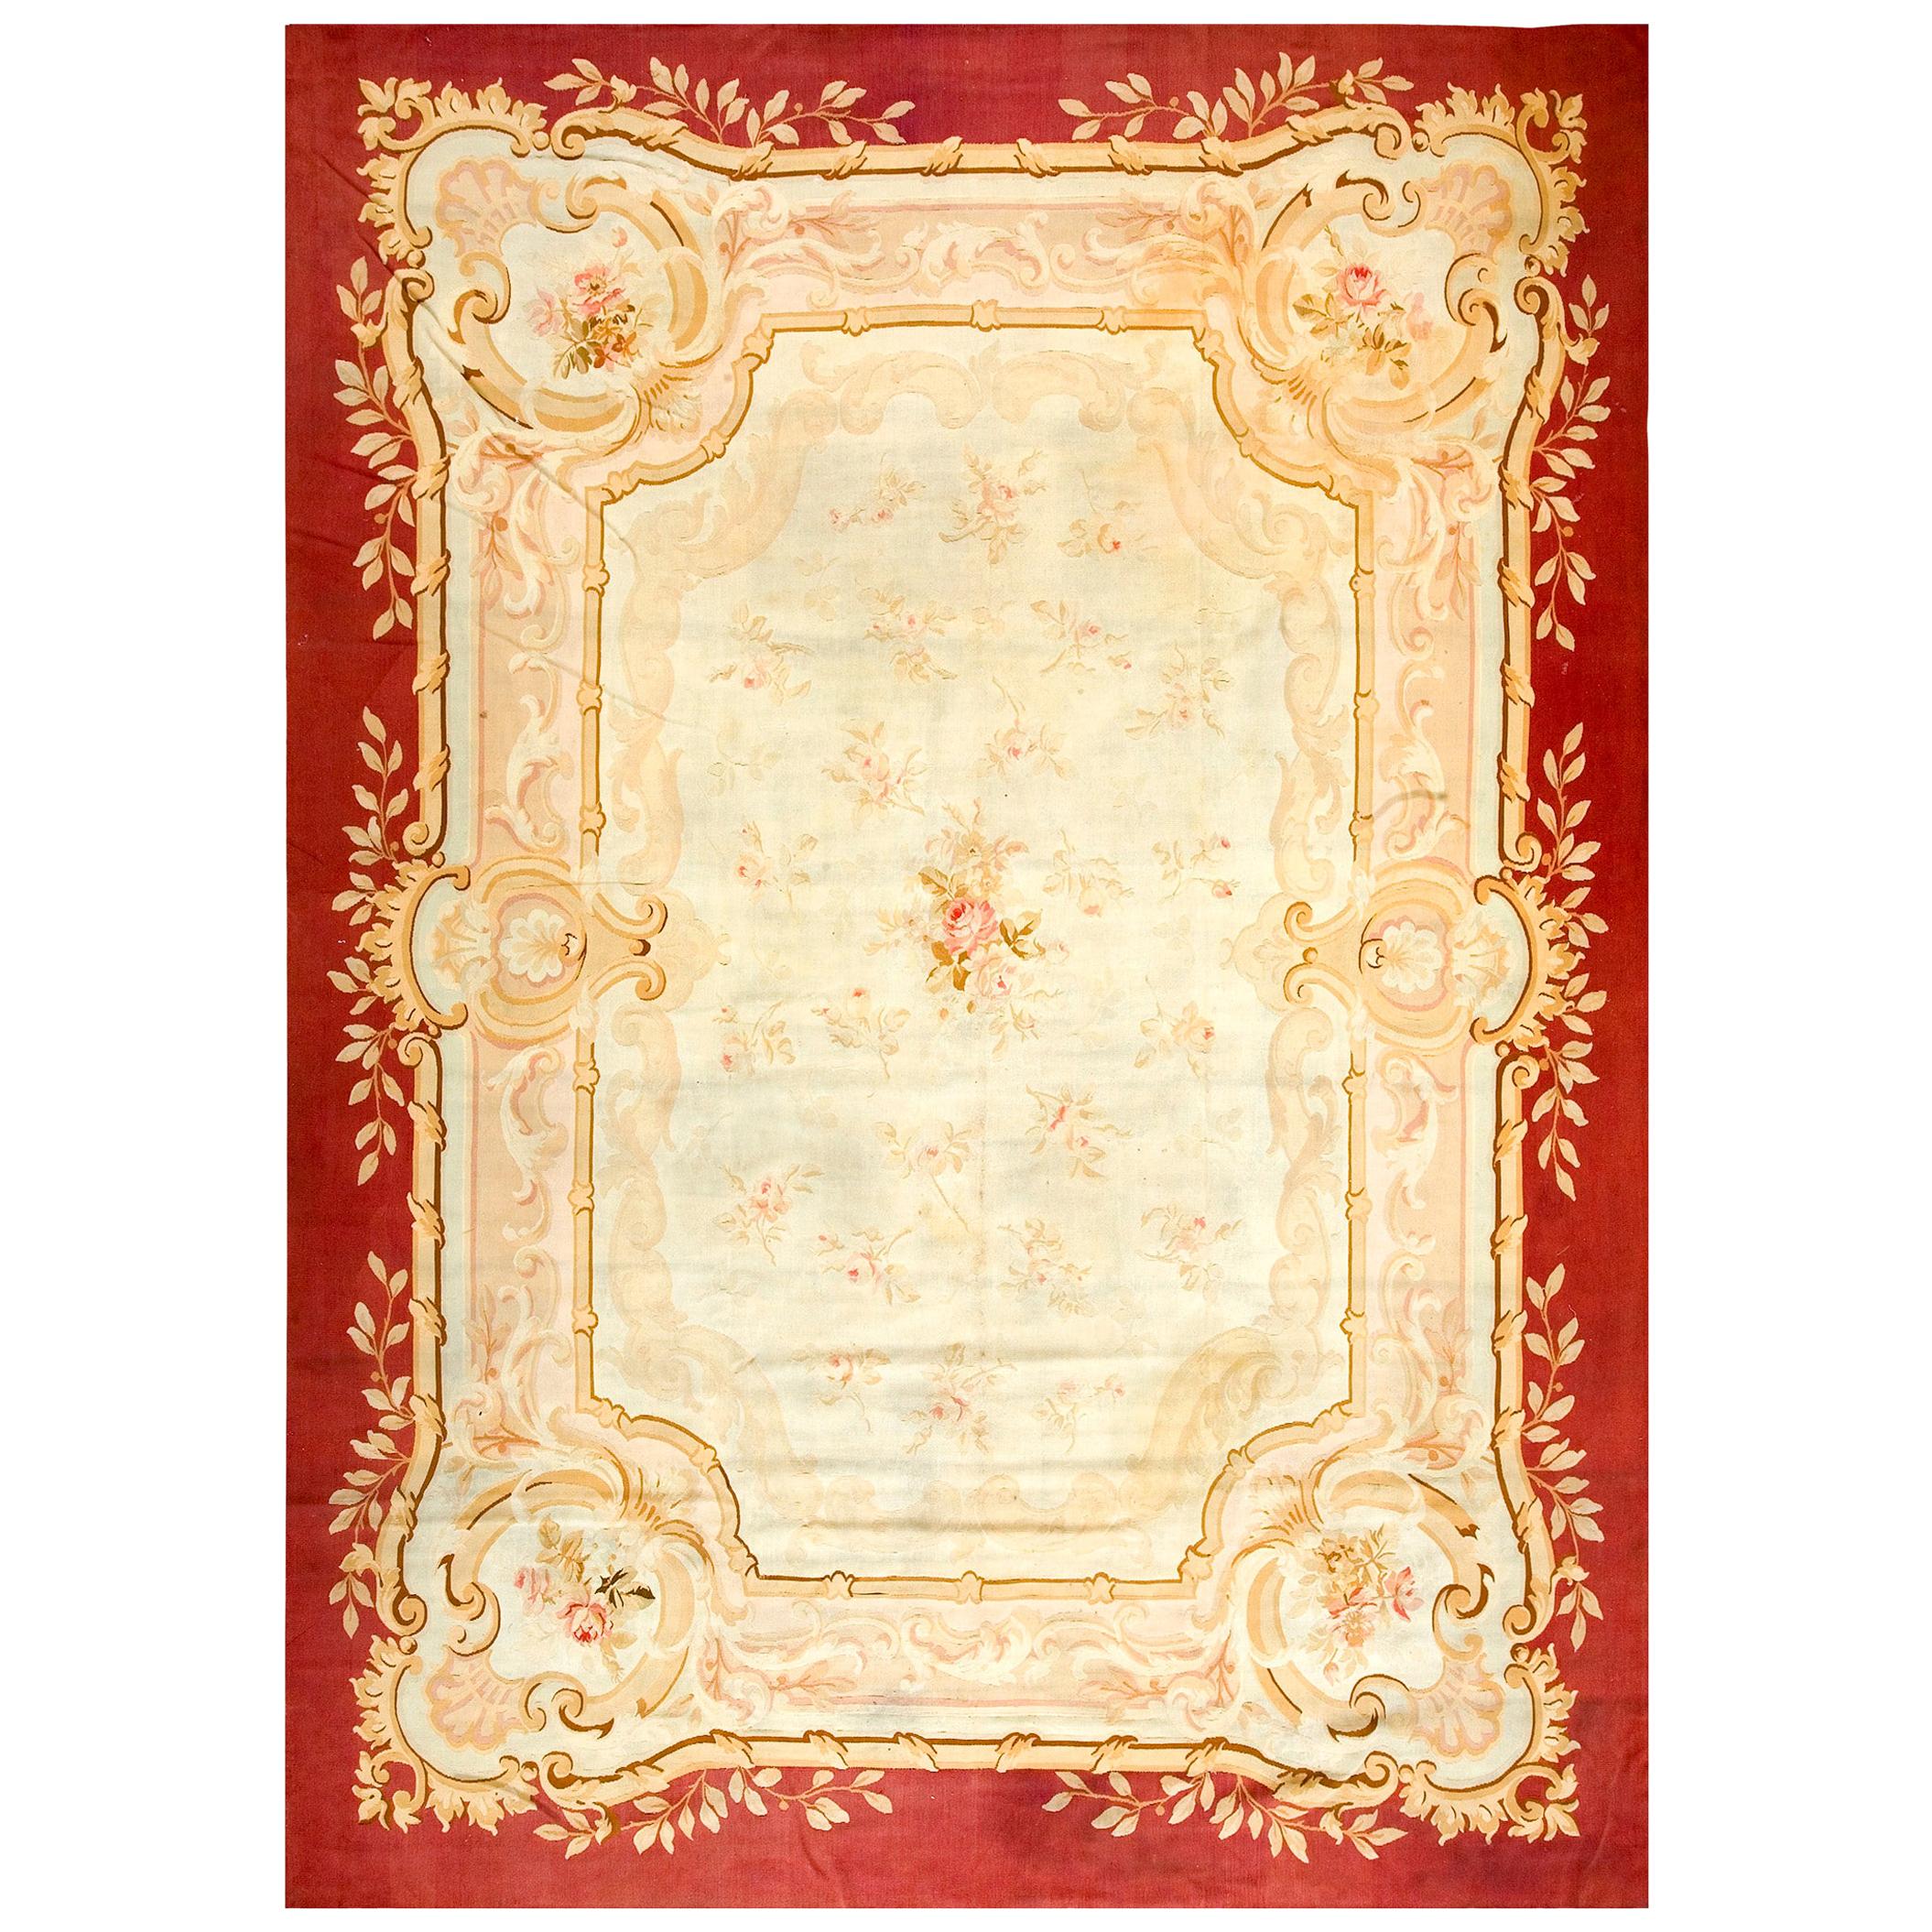 Late 19th Century French Aubusson Carpet ( 9'7" x 13'4" - 292 x 407 ) For Sale